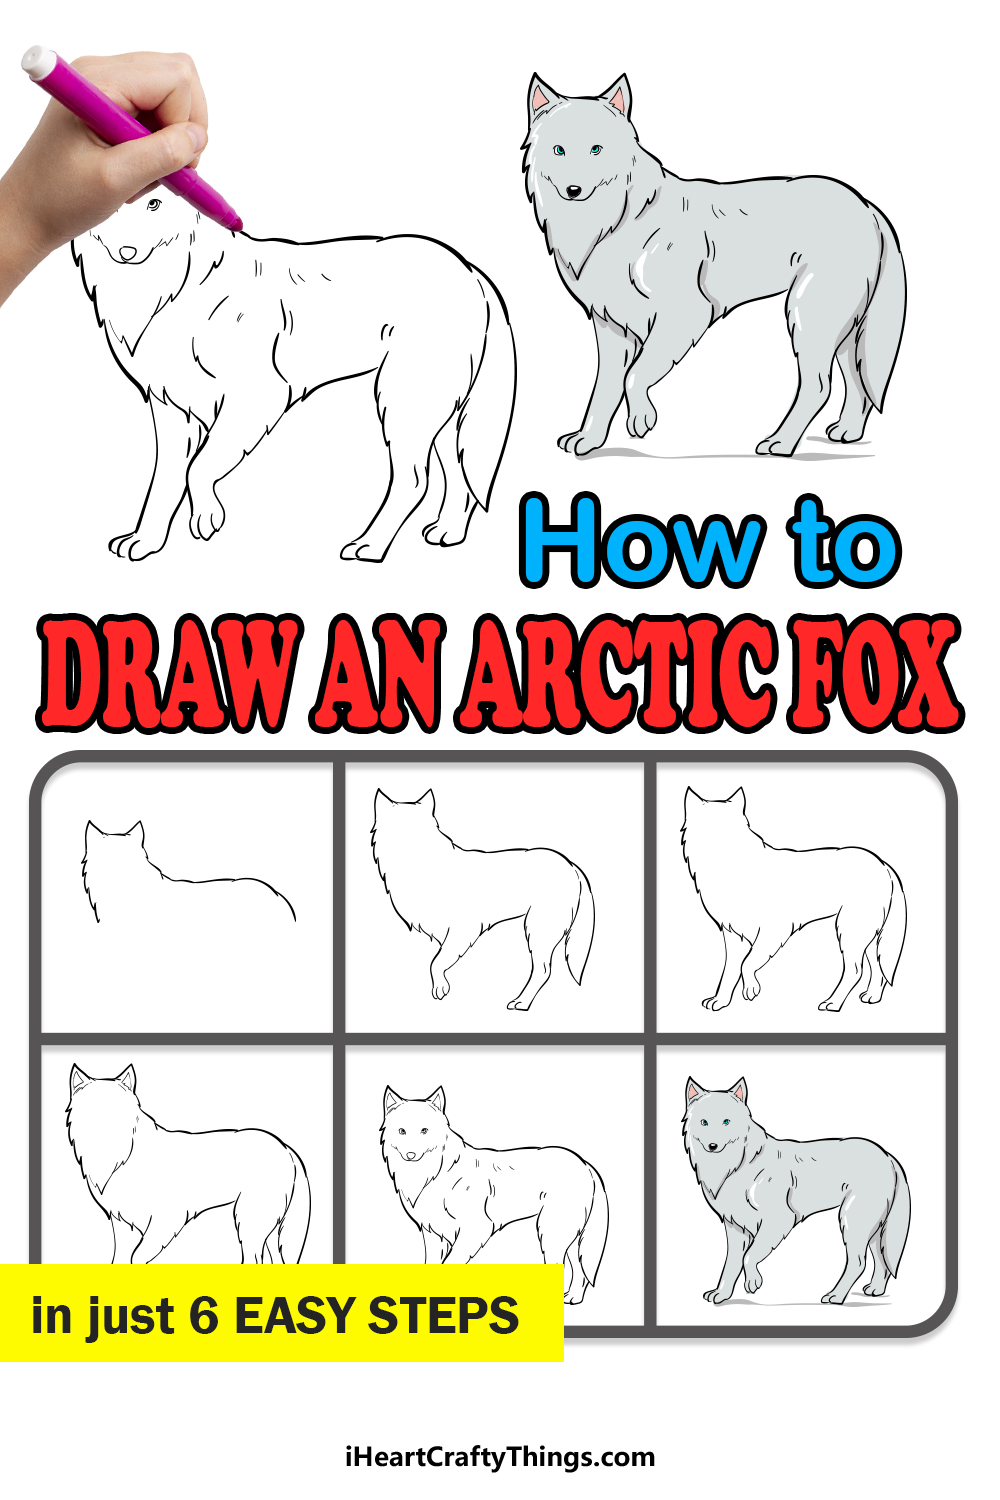 how to draw an arctic fox in 6 easy steps